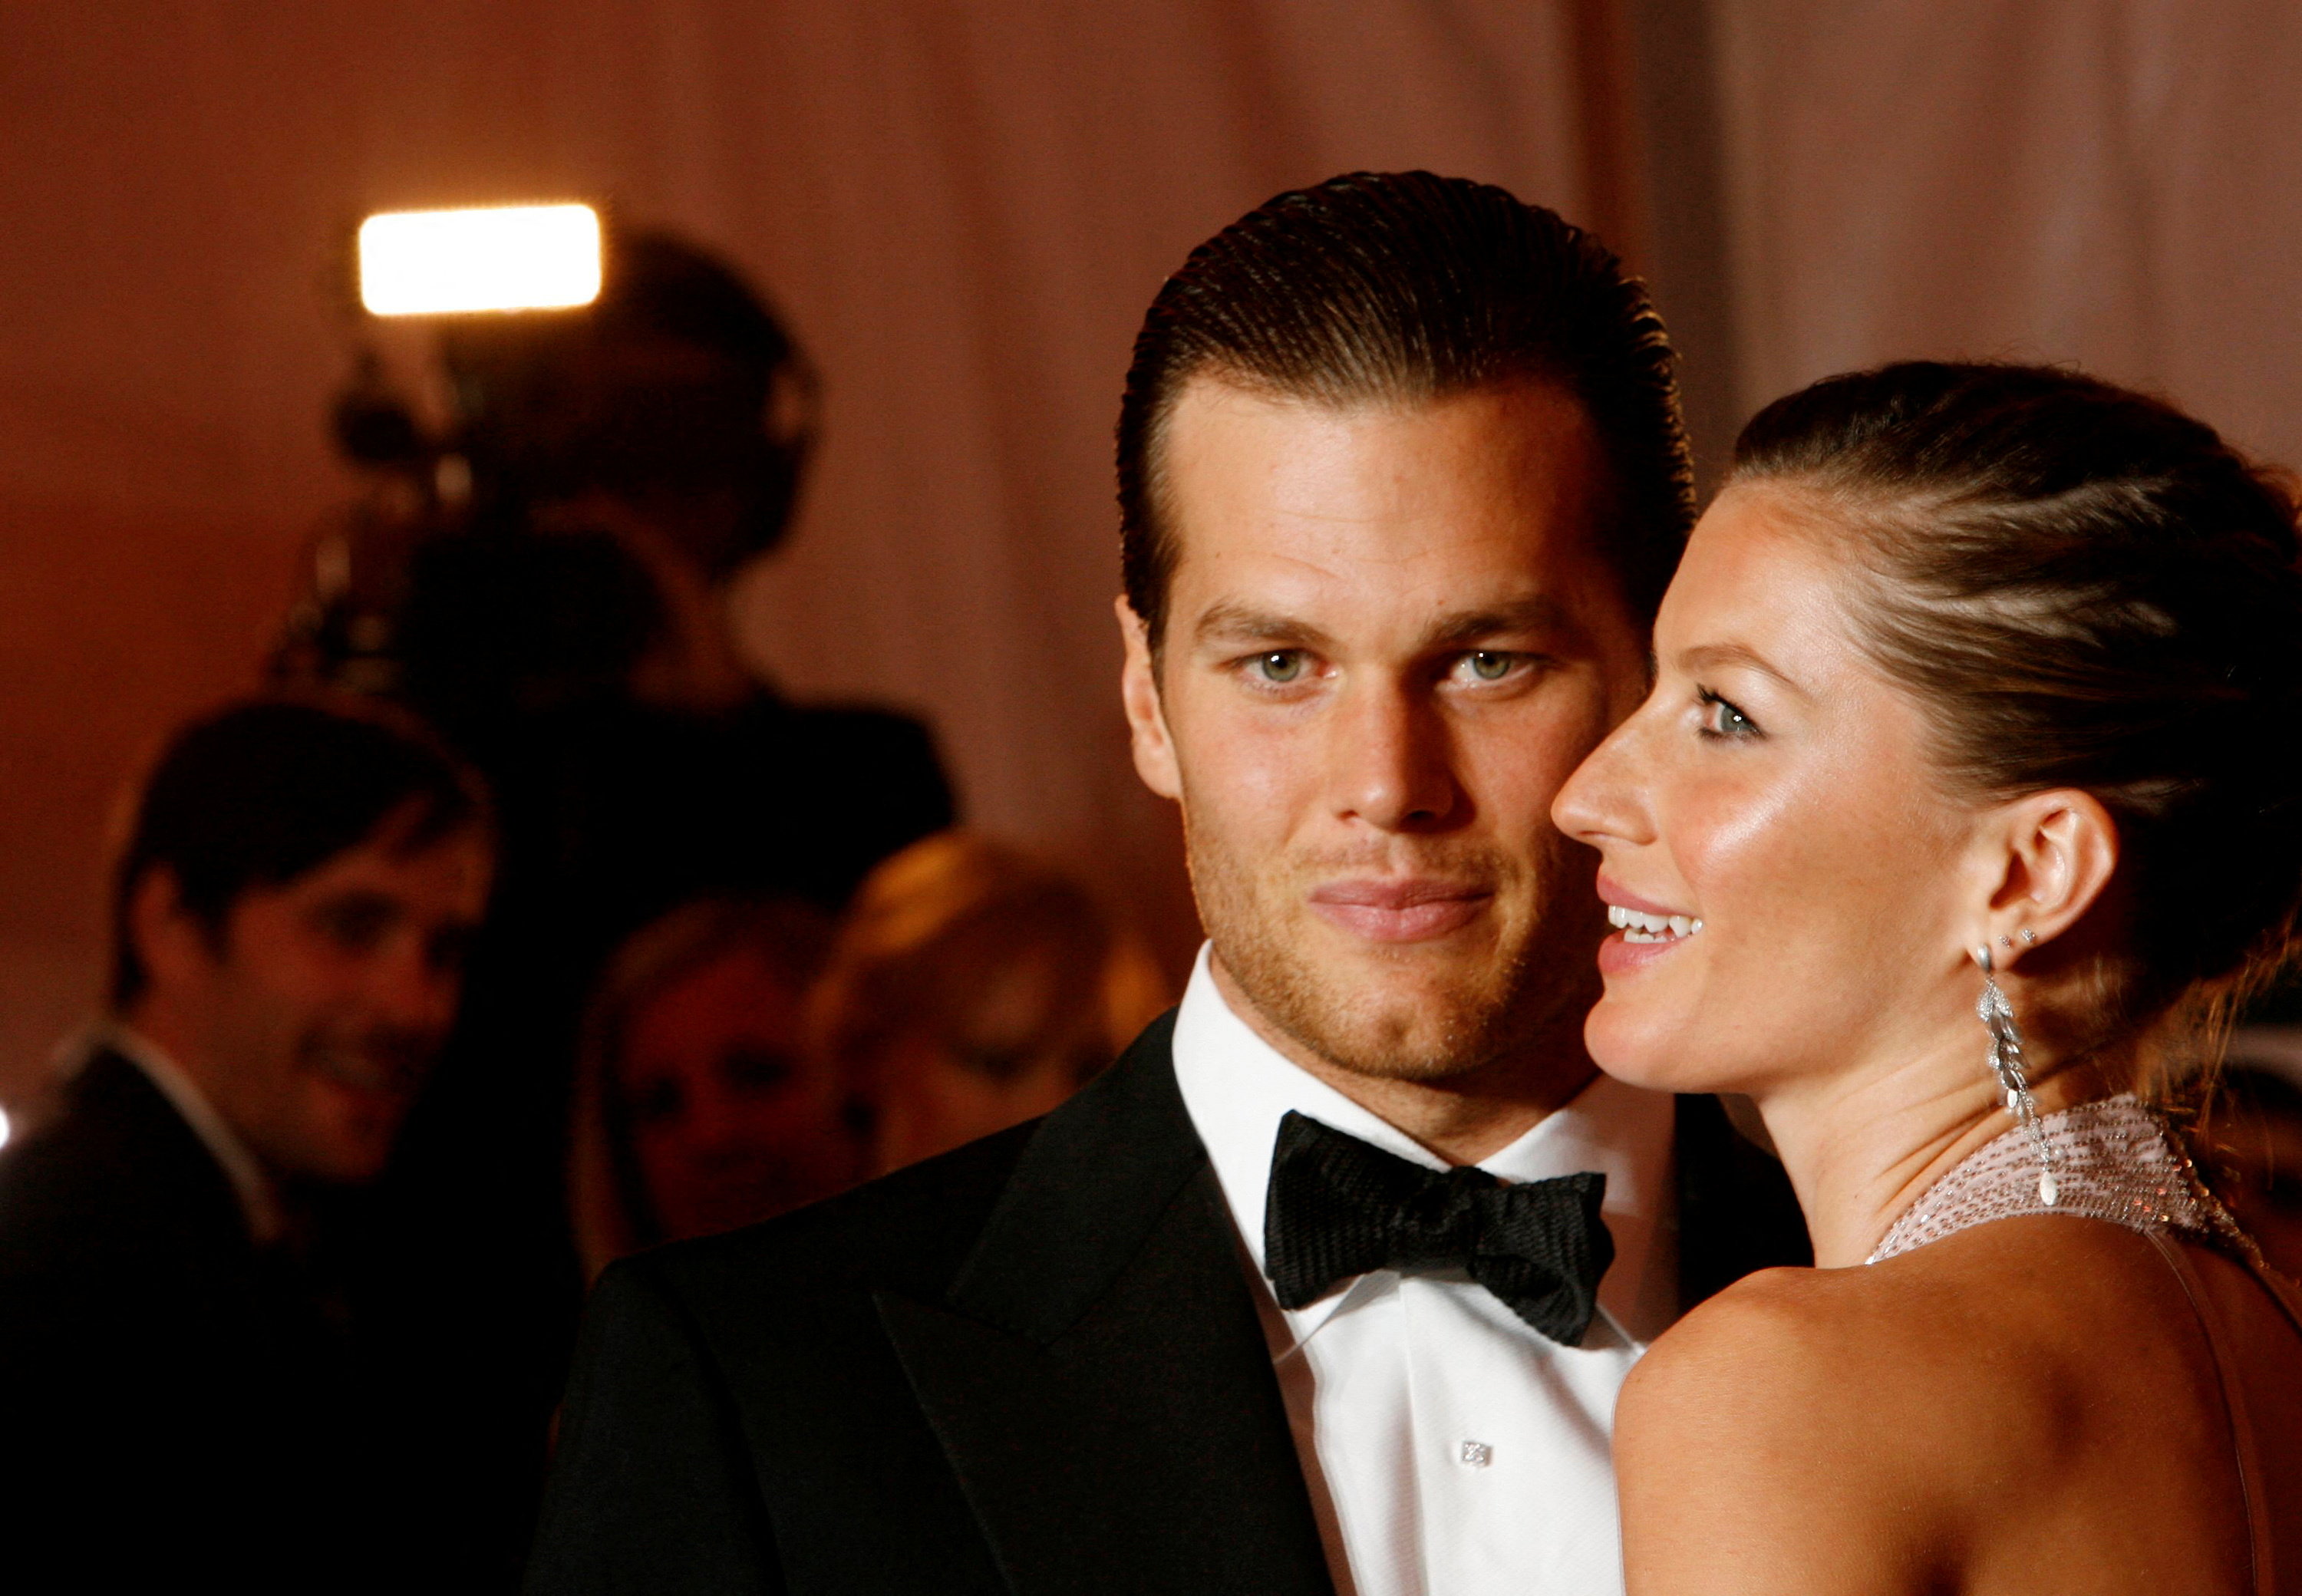 FILE PHOTO: Brazilian supermodel Gisele Bundchen, wearing Atelier Versace, and her boyfriend, New England Patriots quarterback Tom Brady, dressed in Tom Ford, arrive for the Metropolitan Museum of Art Costume Institute Gala, "Superheroes: Fashion and Fantasy" in New York May 5, 2008.     REUTERS/Lucas Jackson/File Photo